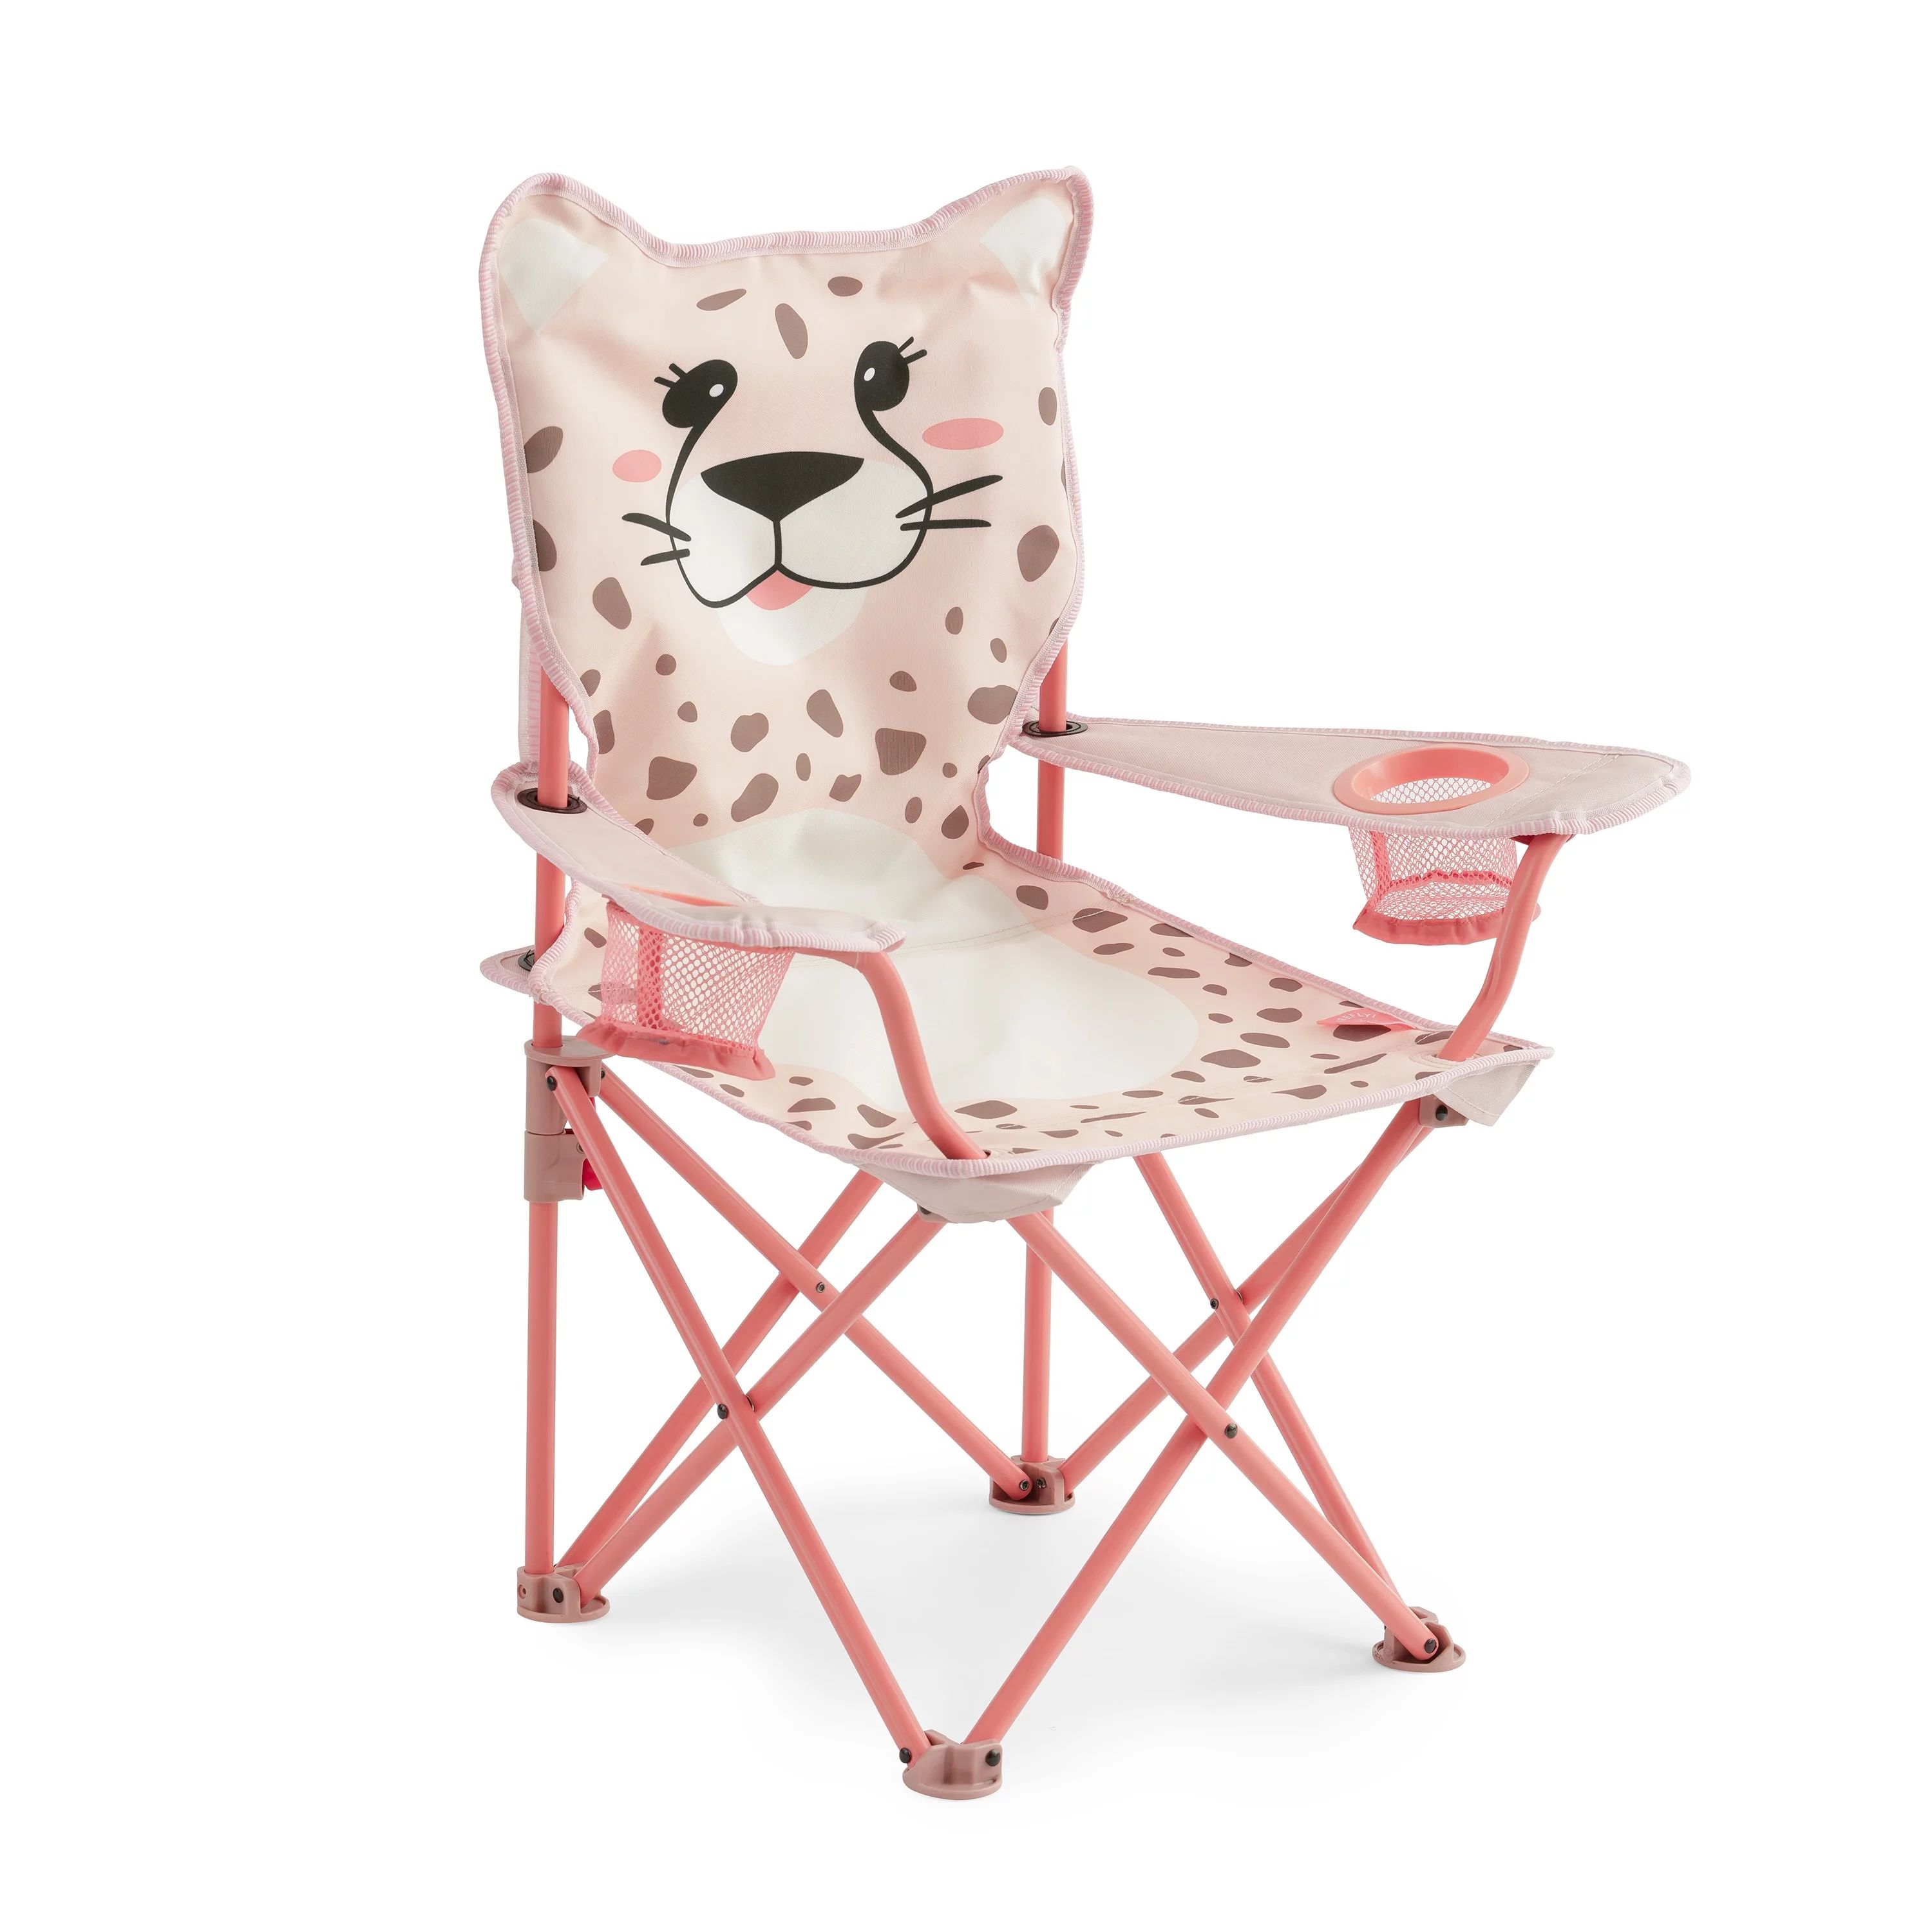 Firefly! Outdoor Gear Cha Cha the Cheetah Kid's Camping Chair - Pink/Tan Color | Walmart (US)